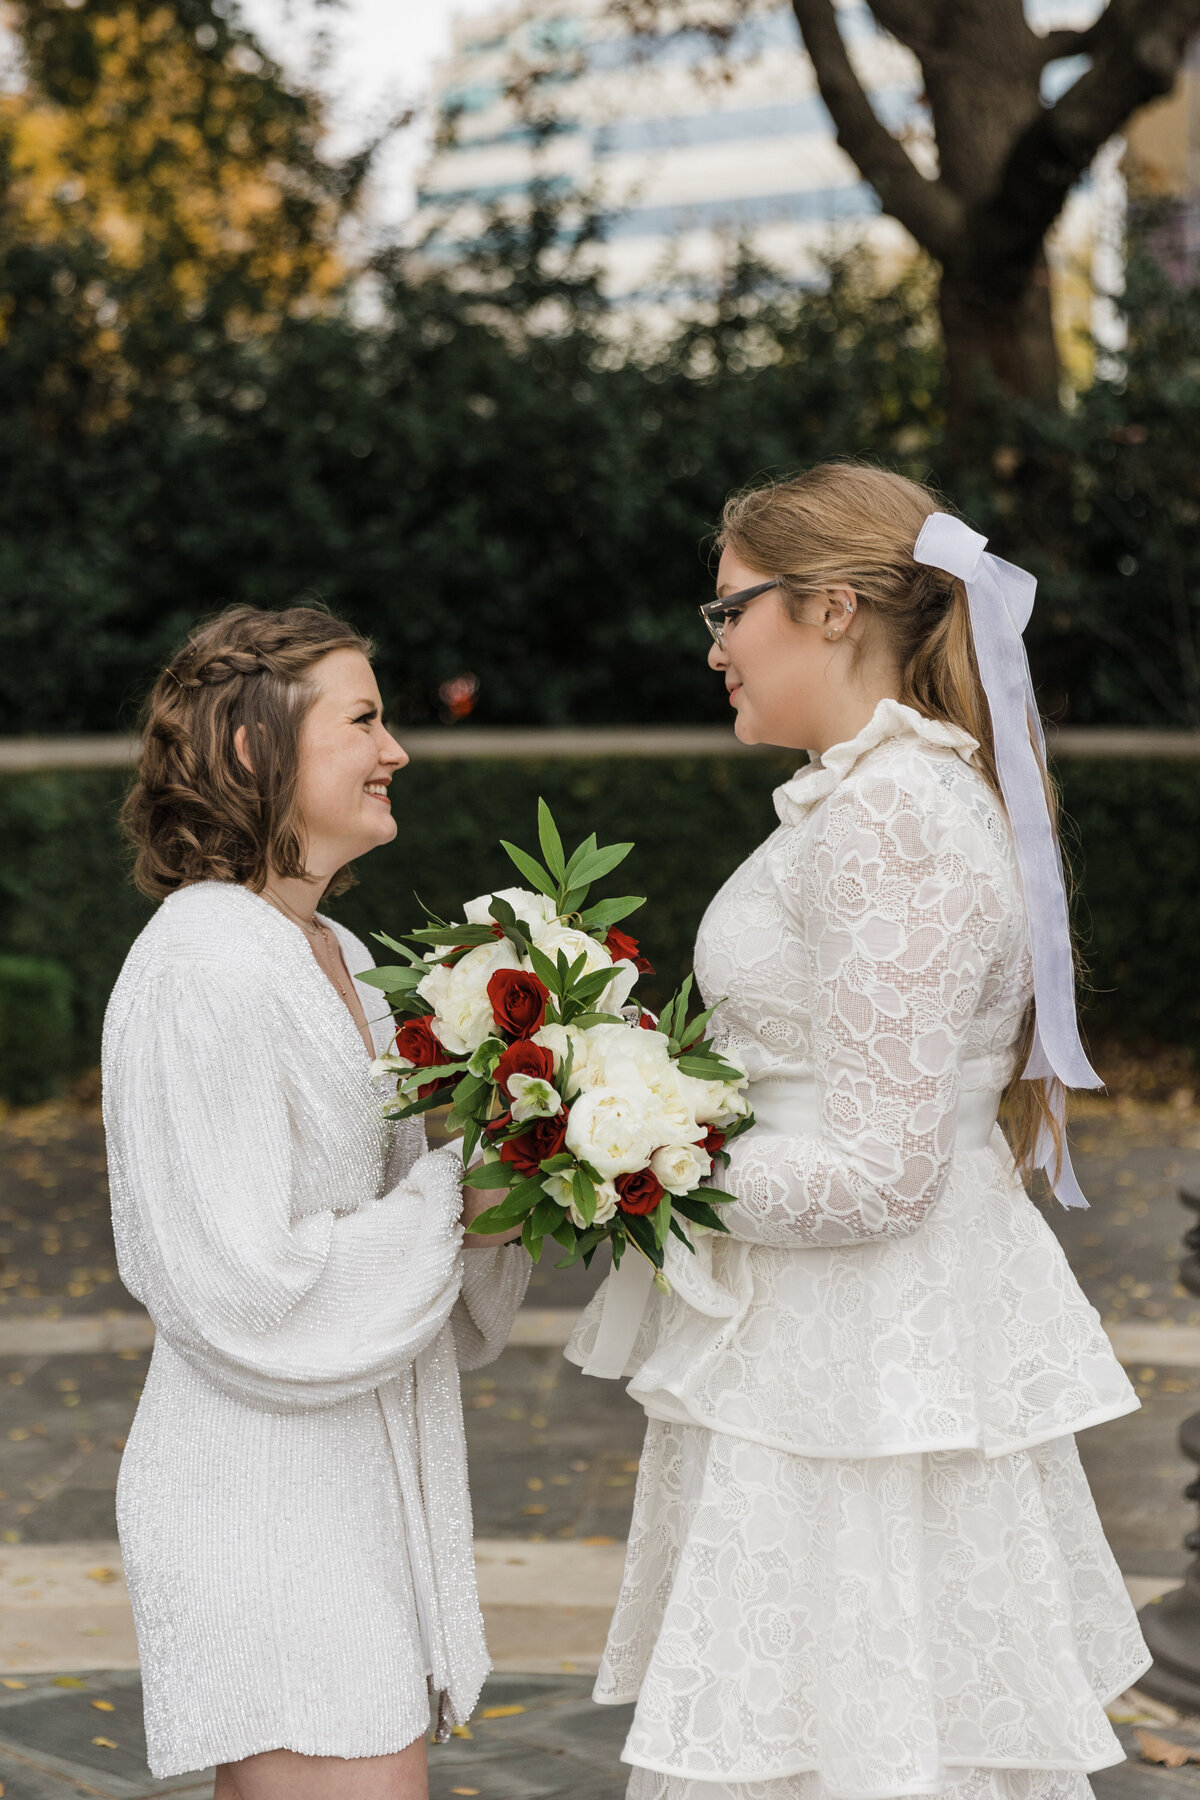 A candid shot of two brides sharing a moment before their elopement at Turtle Creek in Dallas, Texas. The bride on the left is wearing a short white dress, and the bride on the right is wearing a long, intricate dress. Both are holding bouquets and smiling at each other.